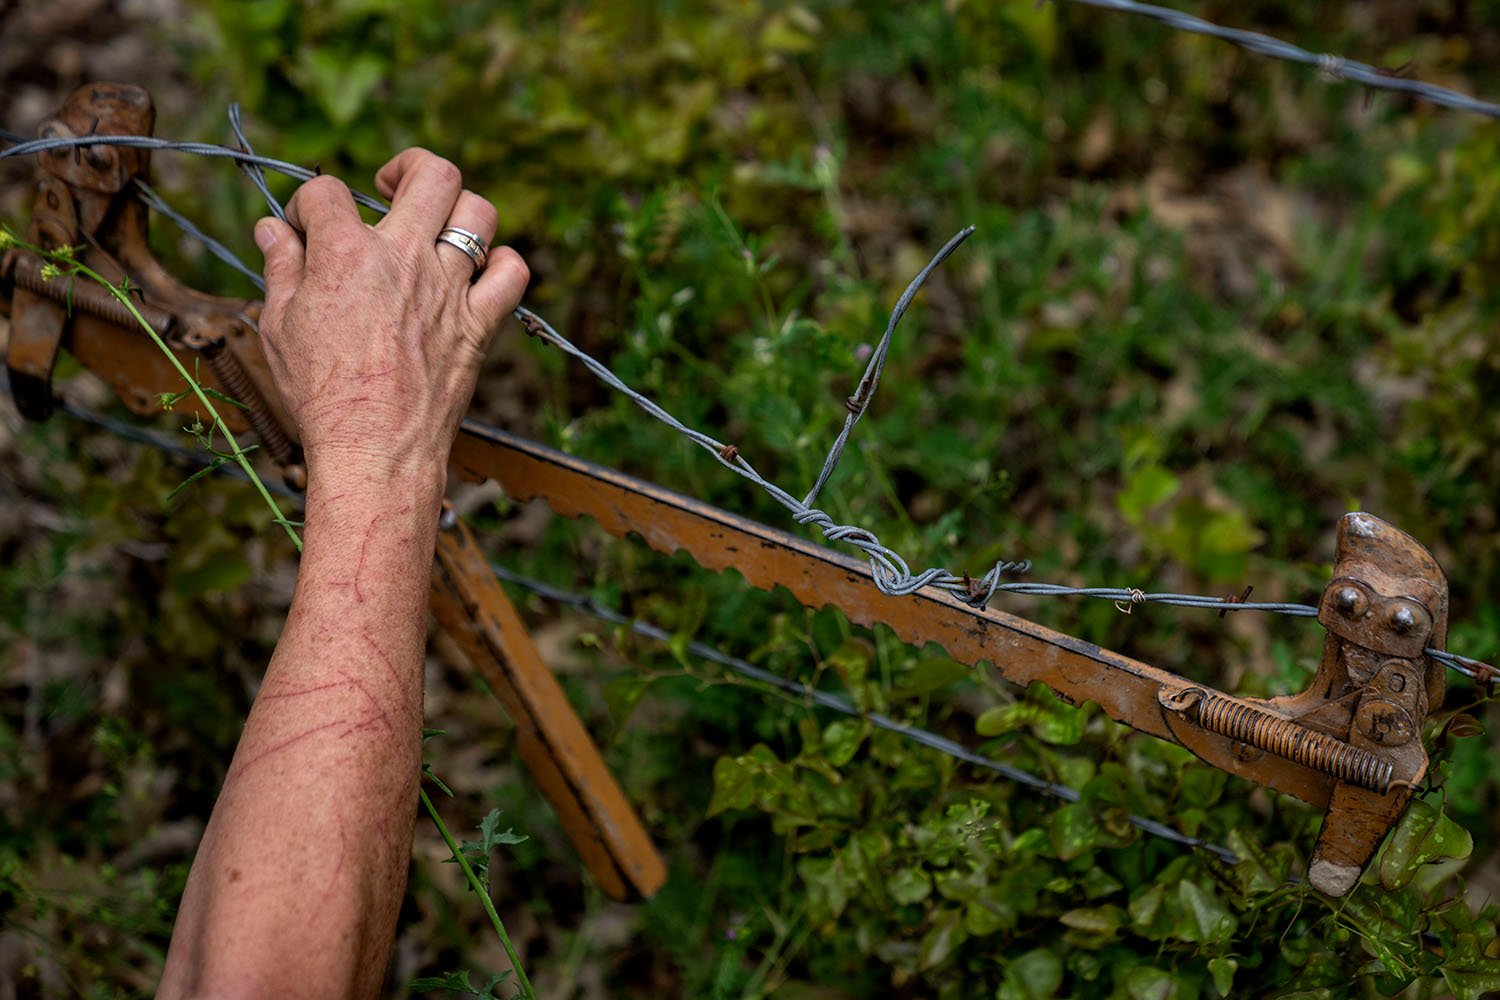  The forearm of Meredith Ellis is covered in scratch marks as she fixes a barbed wire fence on her ranch in Rosston, Texas, Wednesday, April 19, 2023. (AP Photo/David Goldman)  